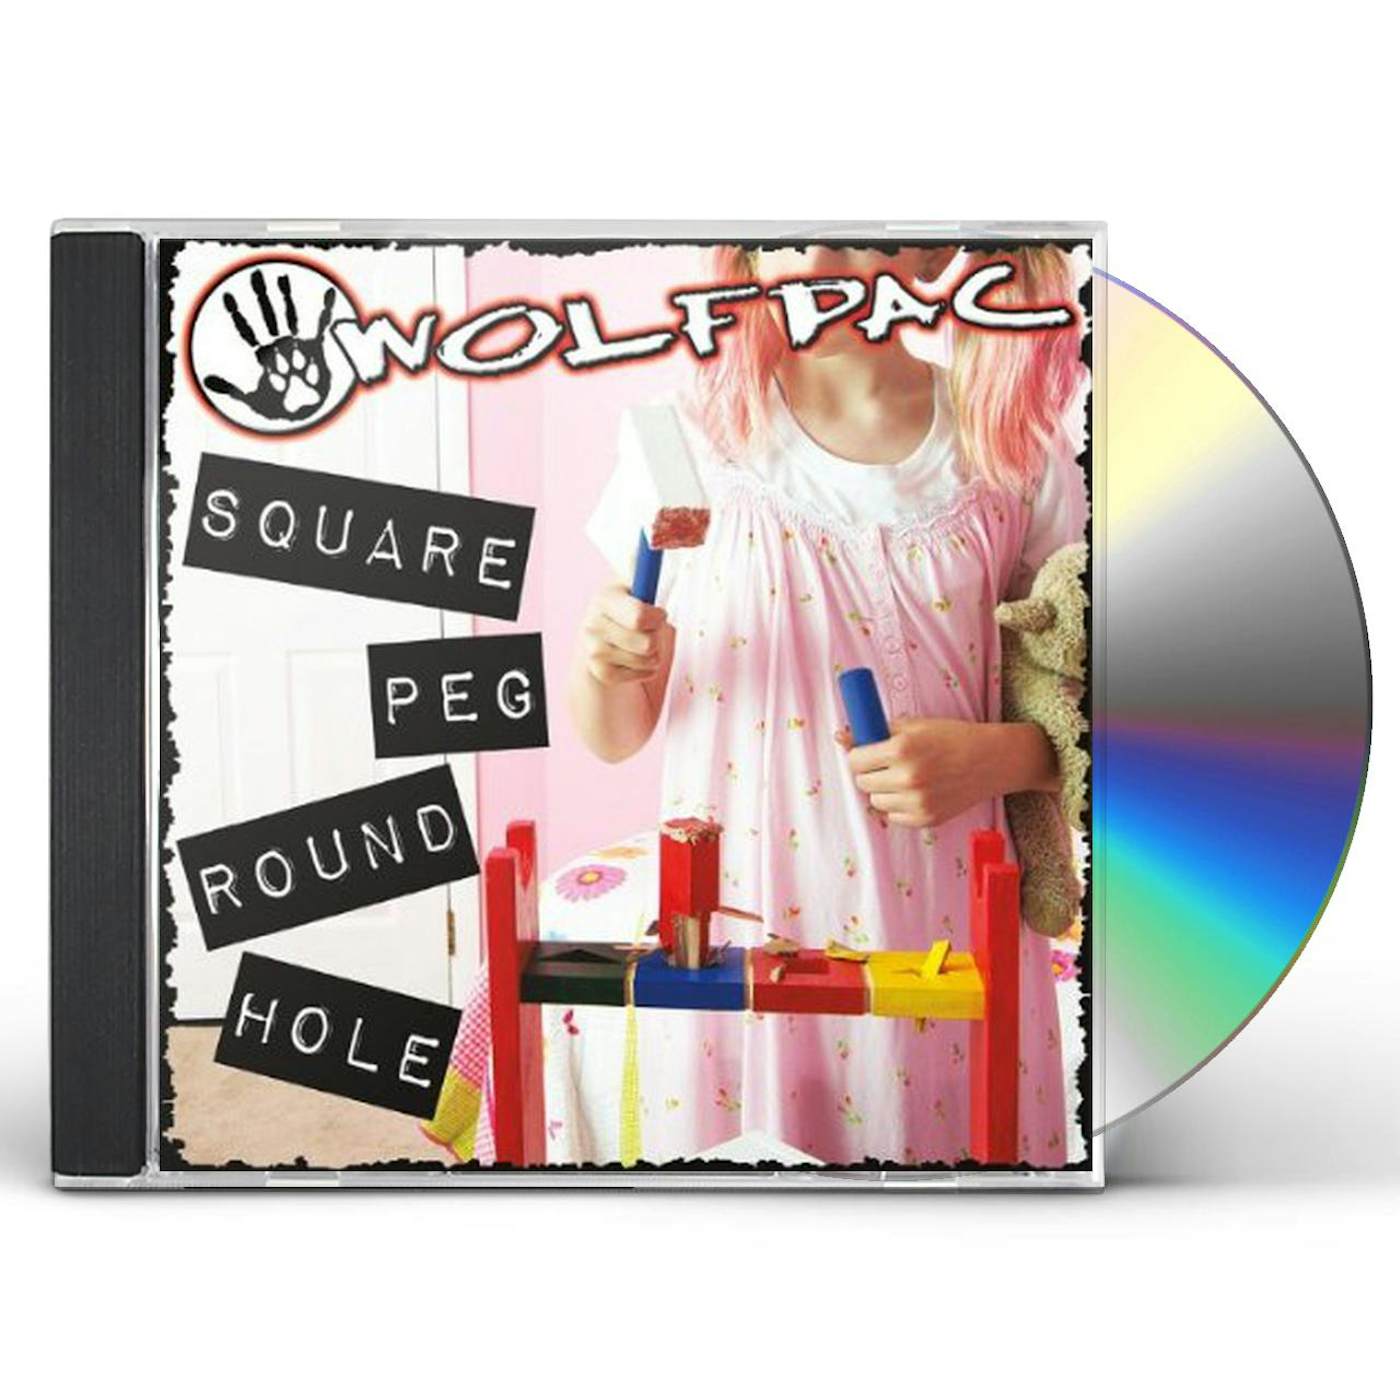 Wolfpac SQUARE PEG ROUND HOLE CD